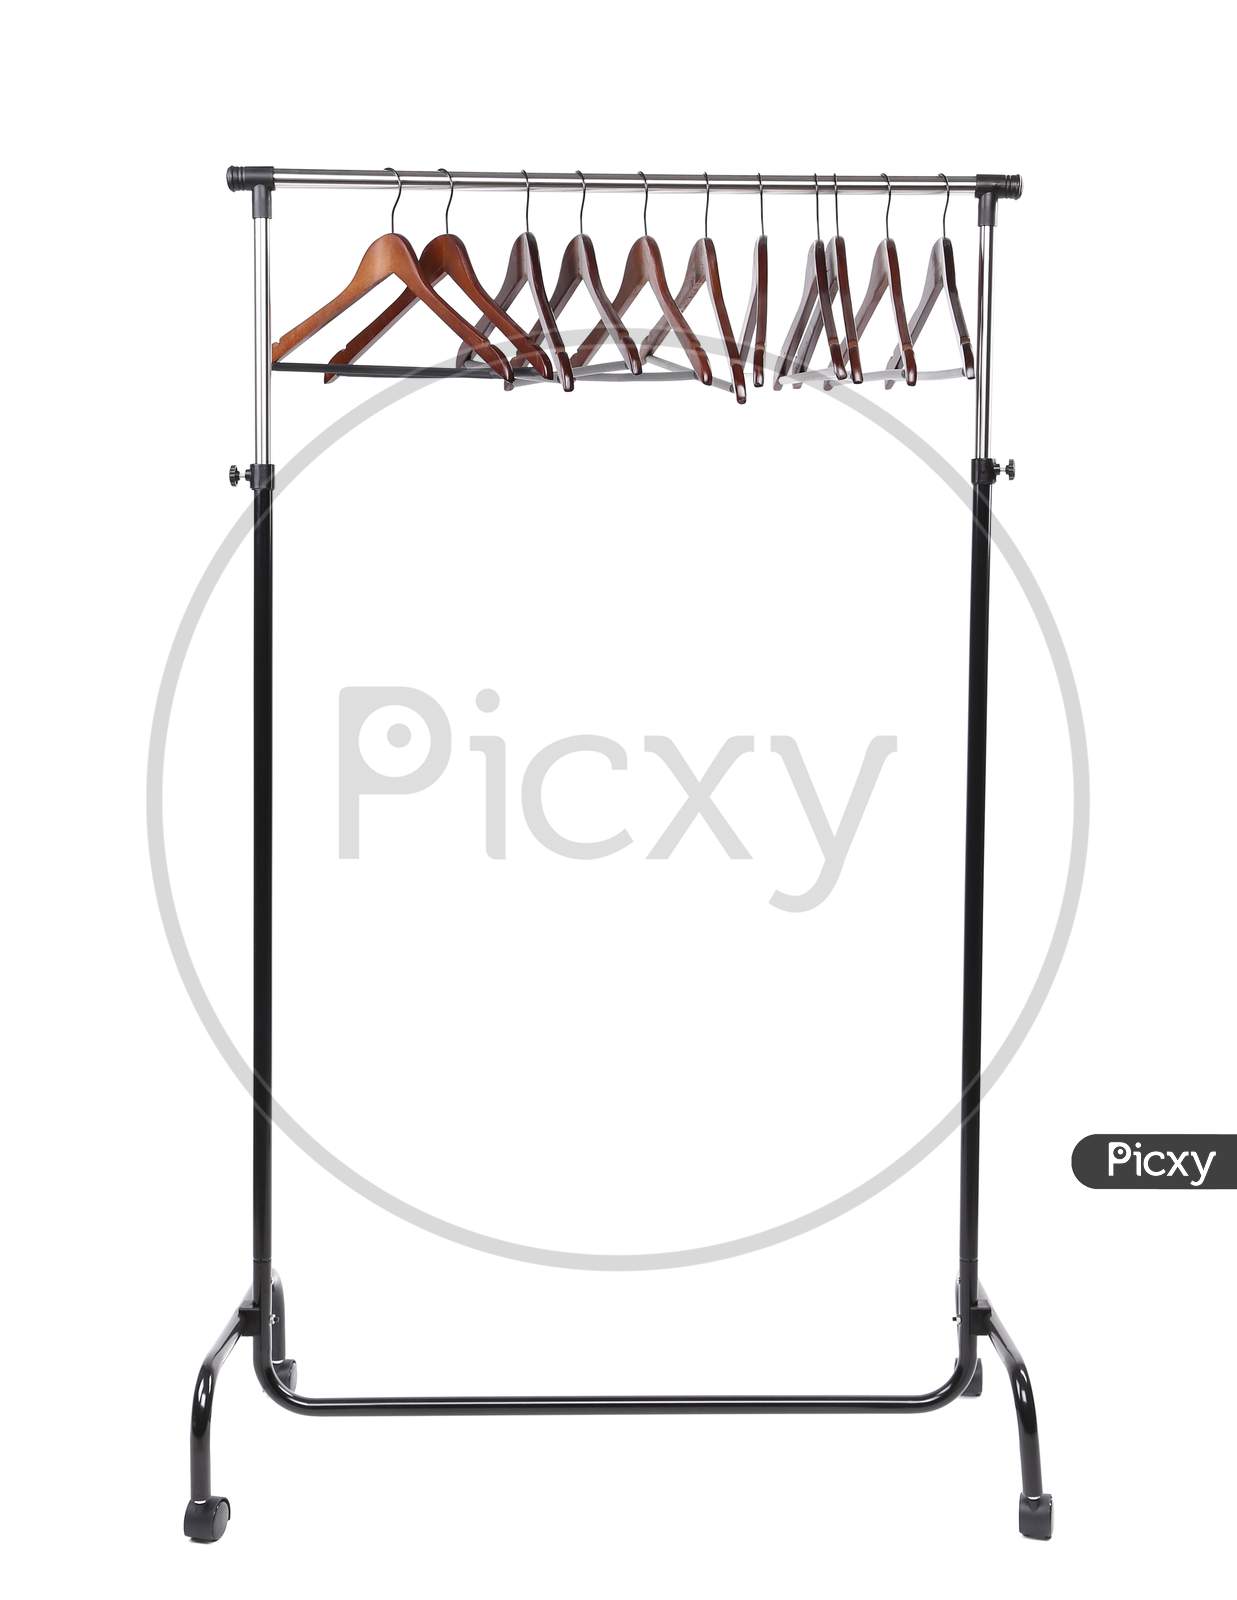 Wooden Clothes Hangers. Isolated On A White Background.